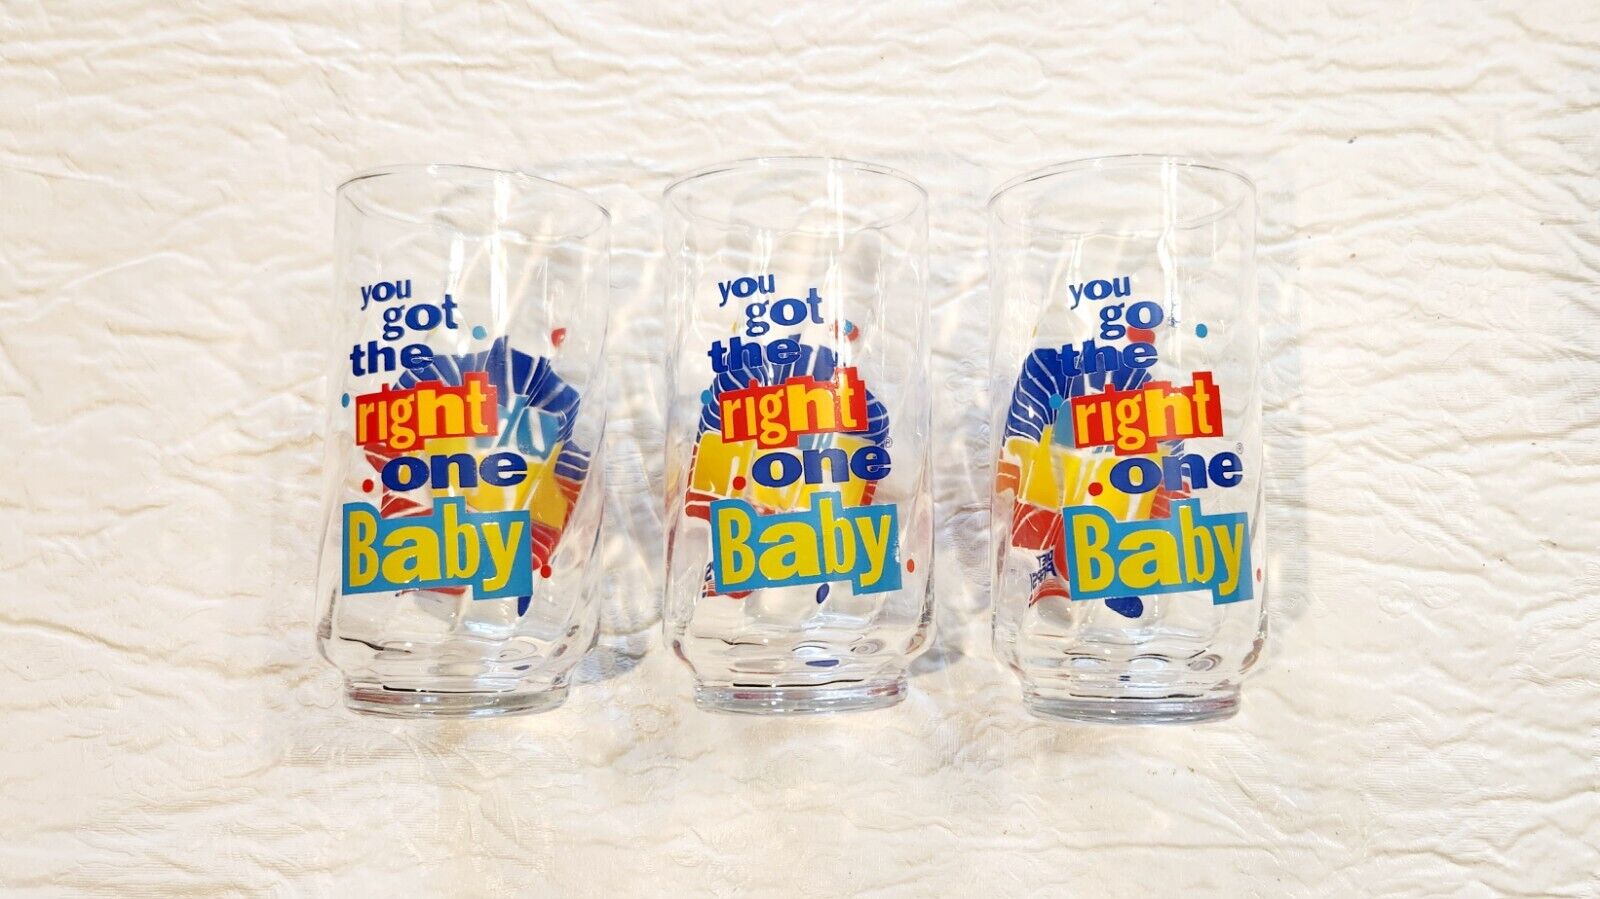 3 Vintage Diet Pepsi New Glasses Uh Huh You Got The Right One Baby Ray Charles